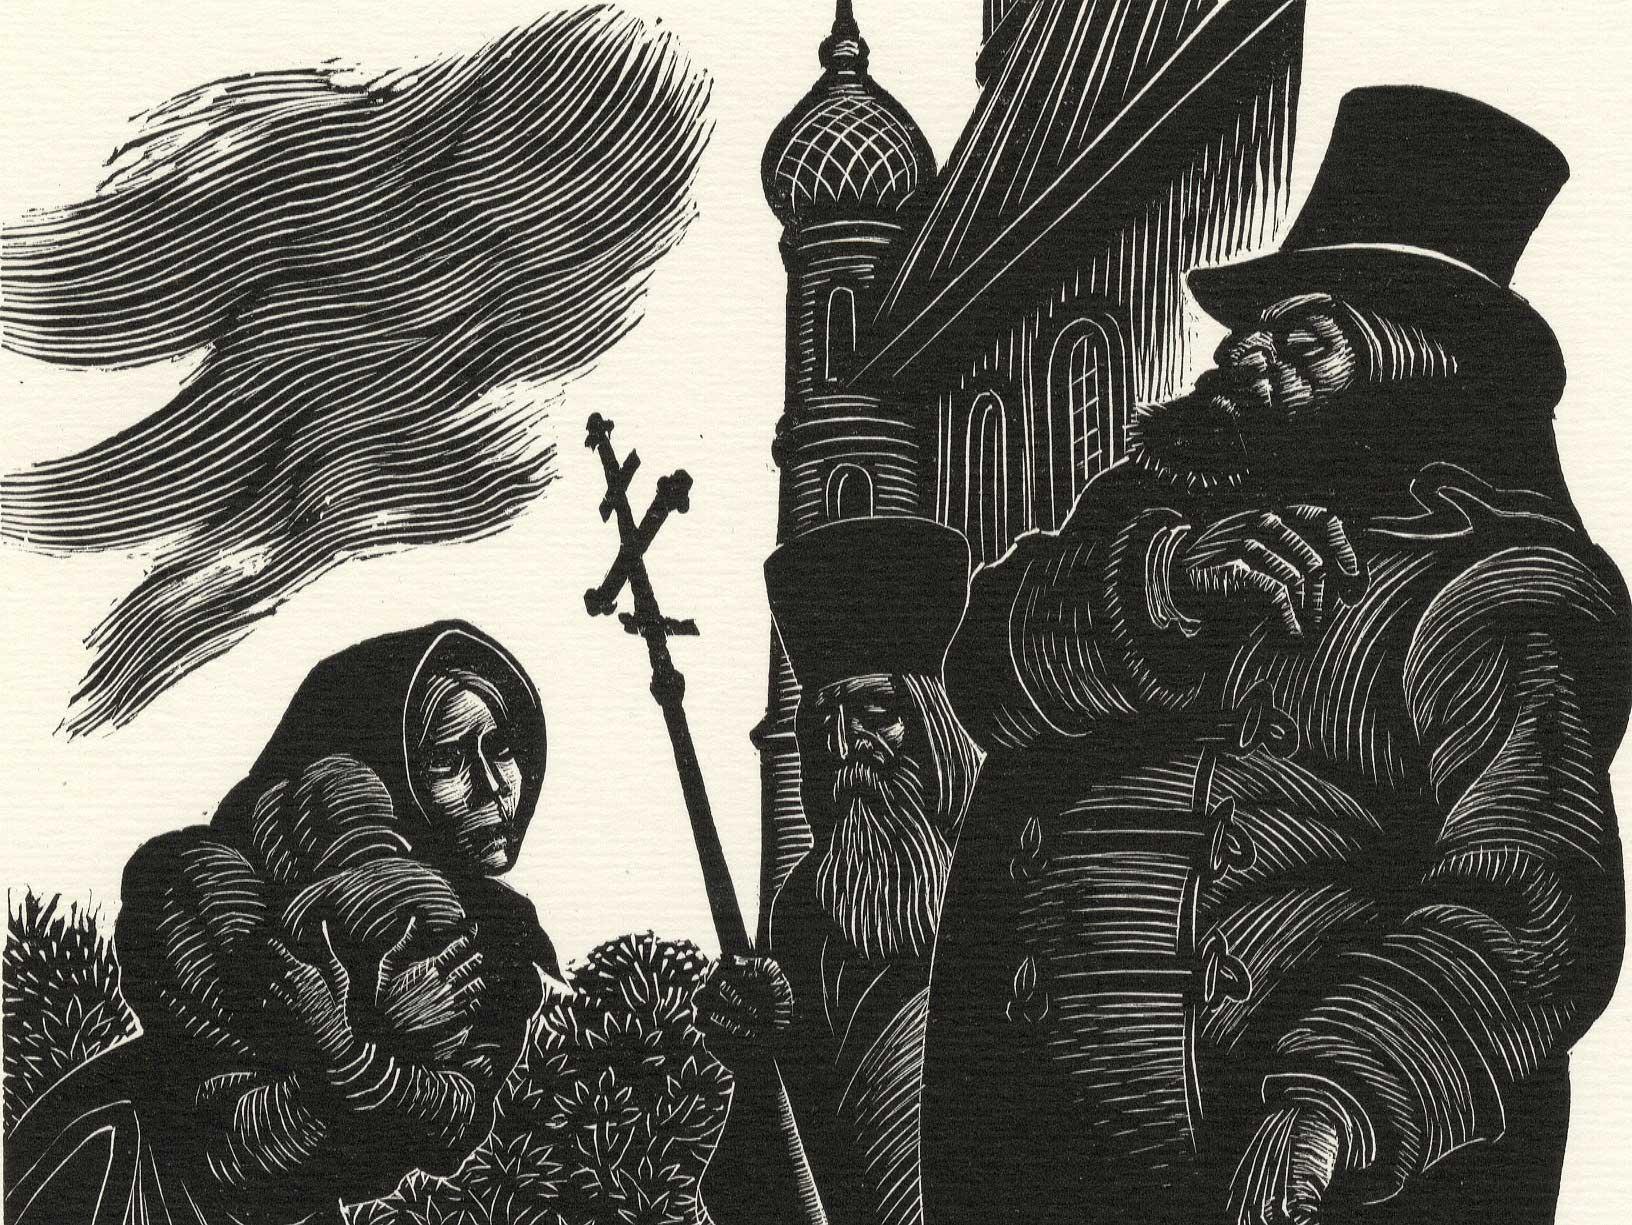 The Rich Man and the Widow - Print by Fritz Eichenberg.